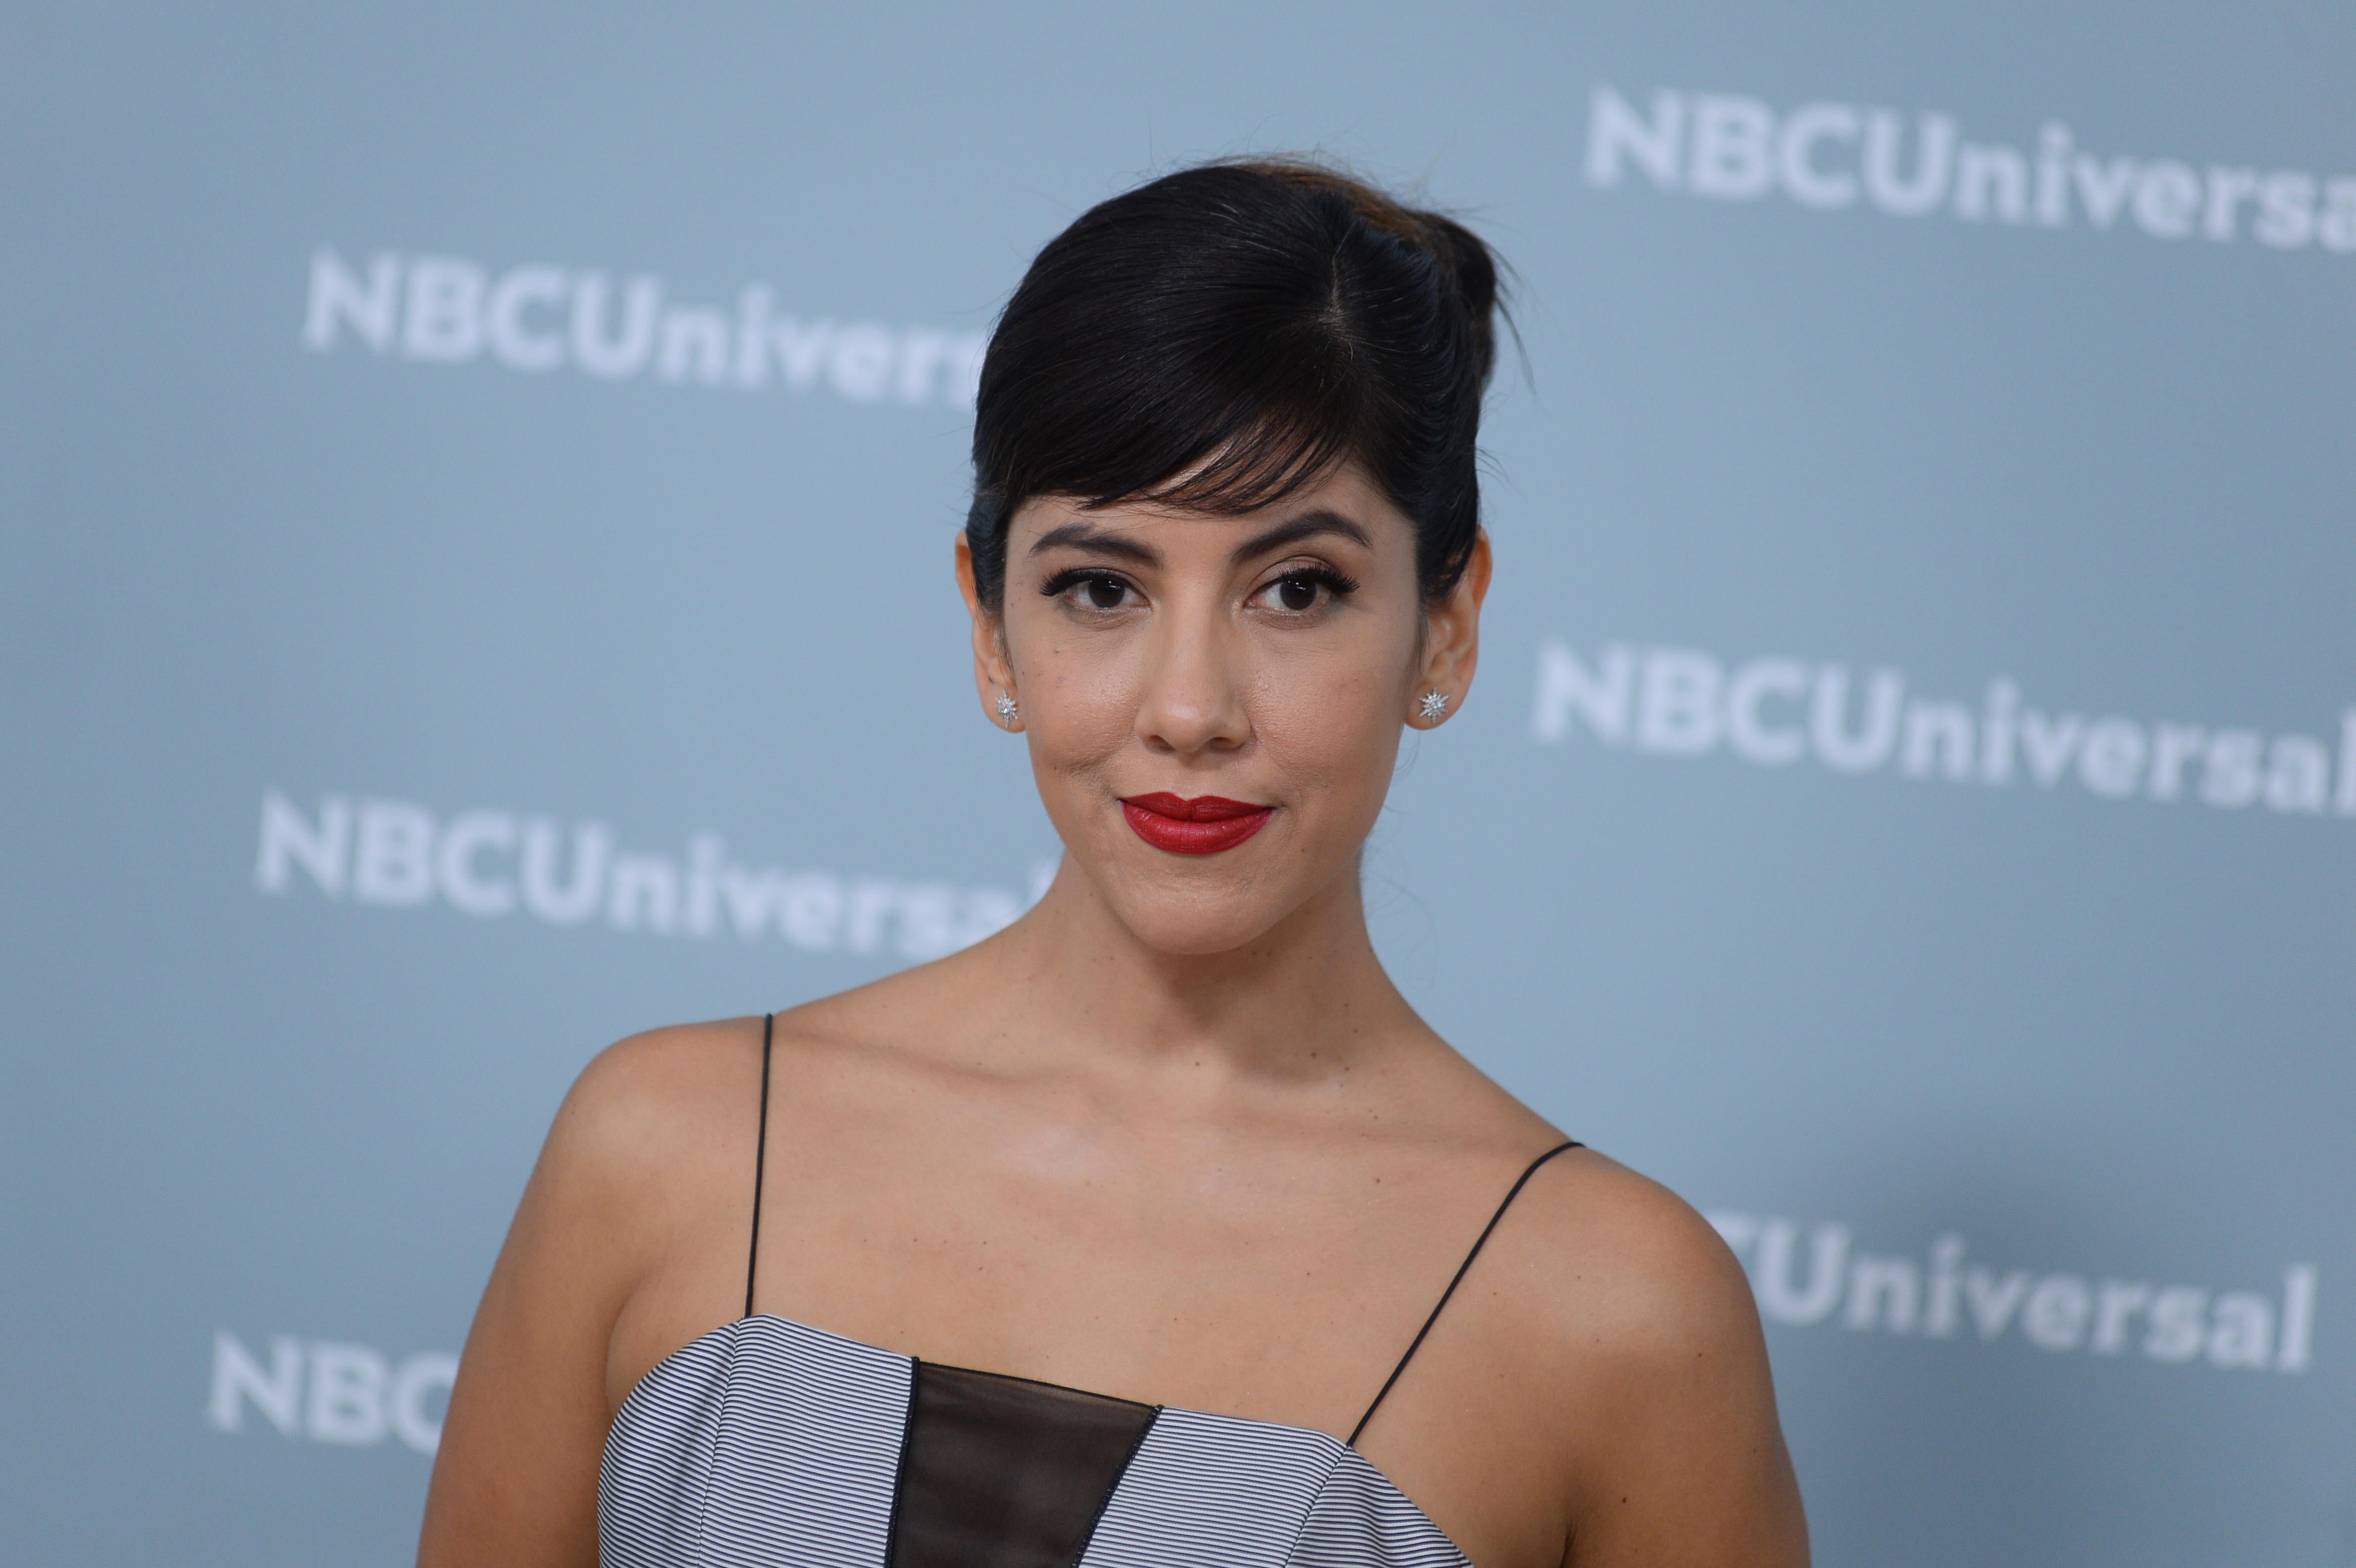 Brooklyn Nine-Nine’s Stephanie Beatriz has spoken about being married to a man and still being bi (Alamy/PA)